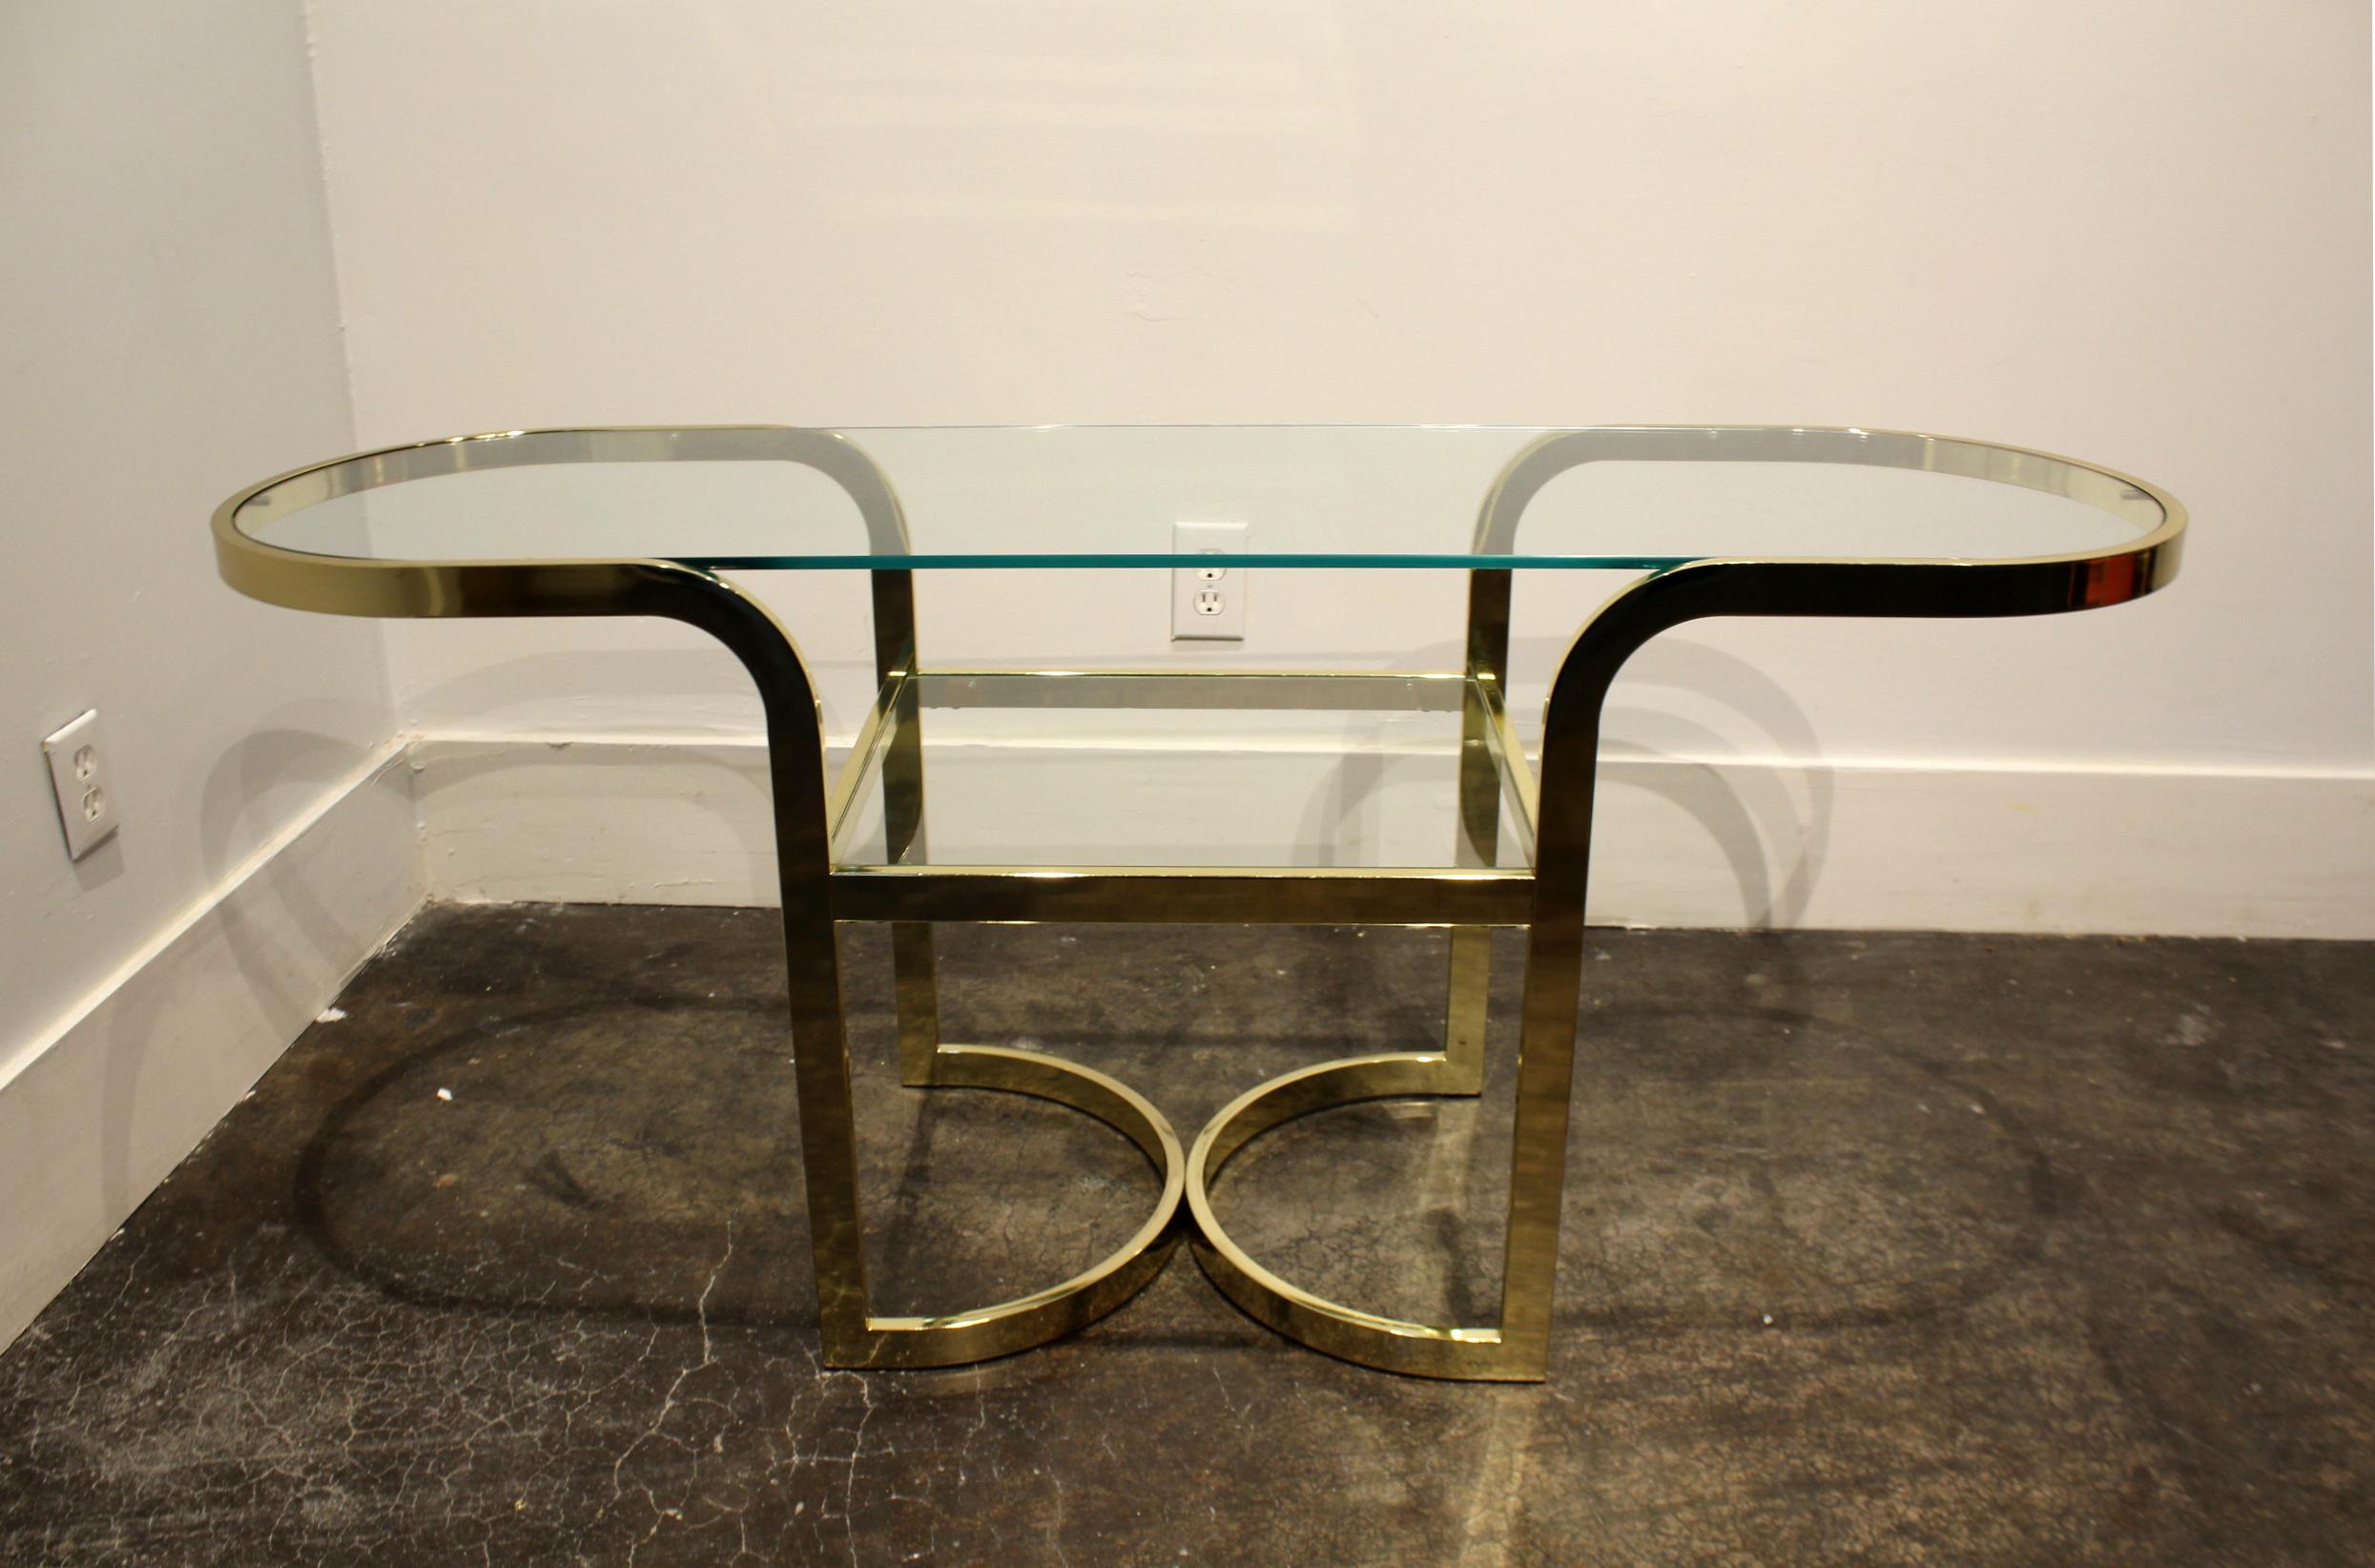 20th Century Brass Console Cafe Table with Pink Chairs by DIA Design Institute of America For Sale